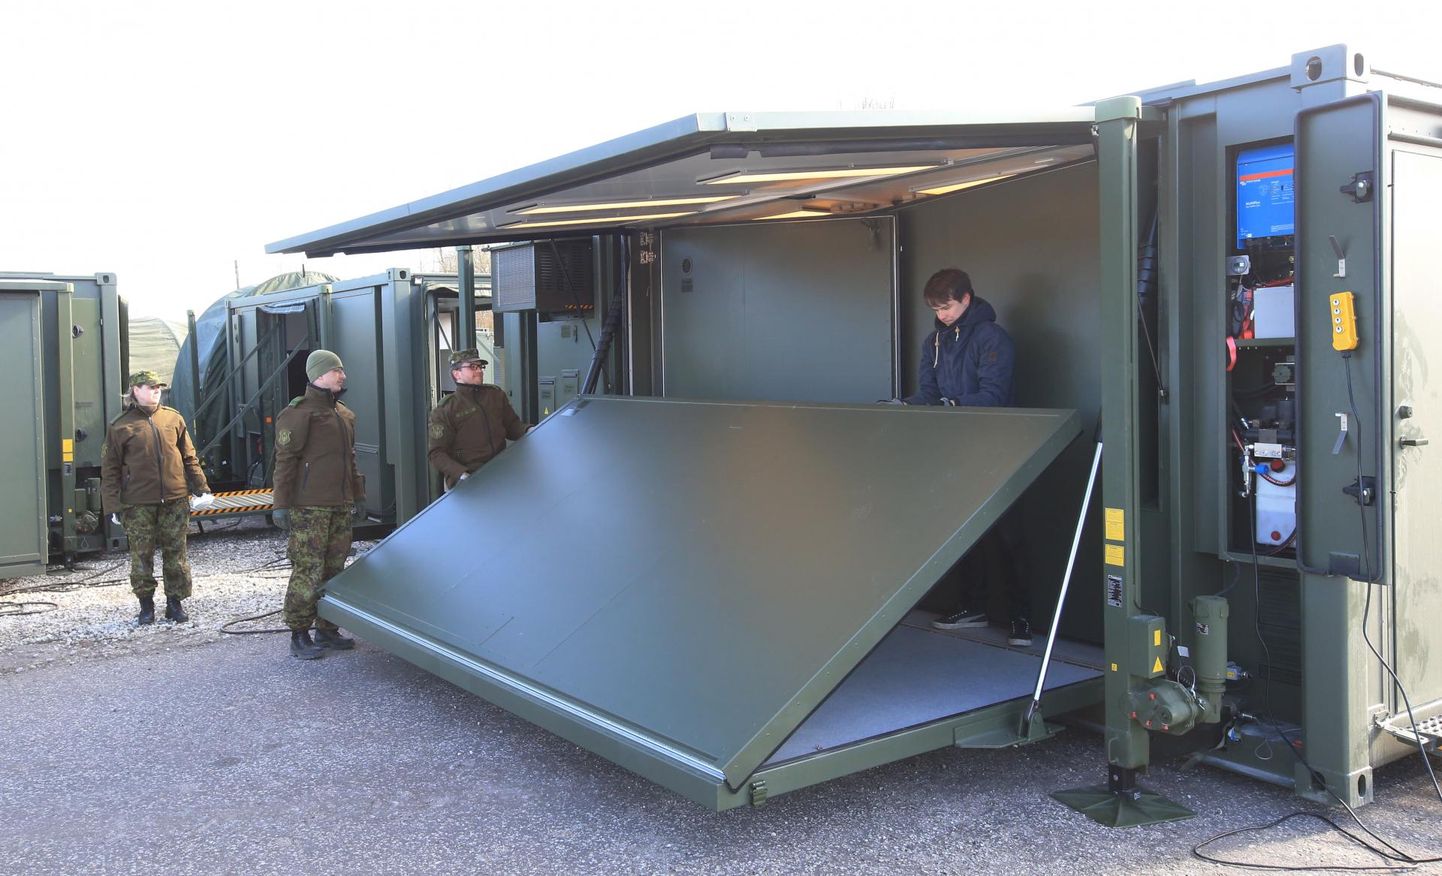 A unique Defense Forces field hospital made up of containers and tents will be set up next to the Kuressaare Hospital by Thursday. The field hospital was assembled in Tartu on Monday.